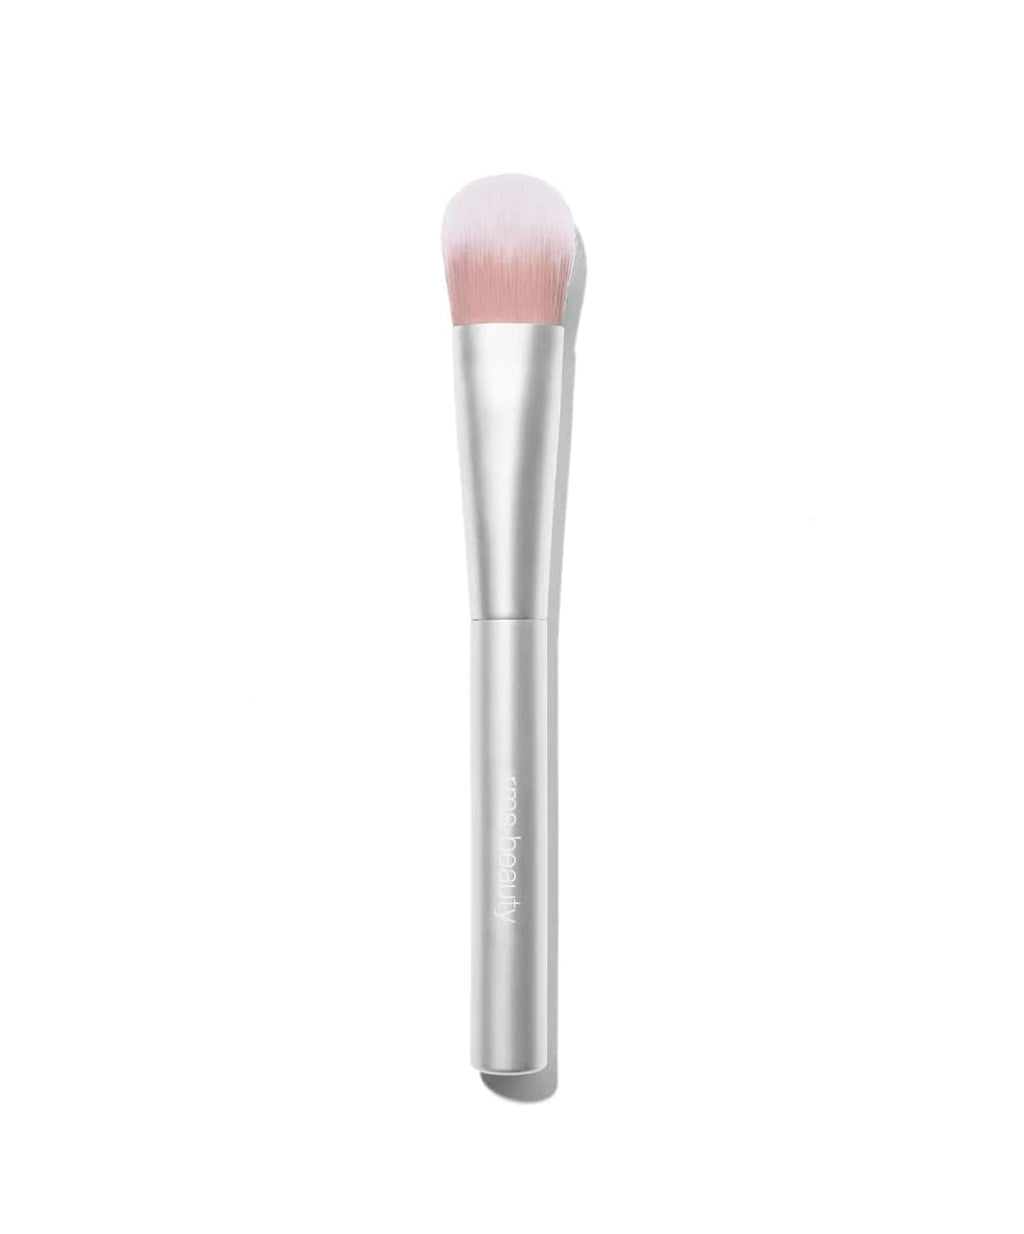 RMS - Skin2skin everything brush - The Natural Beauty Club